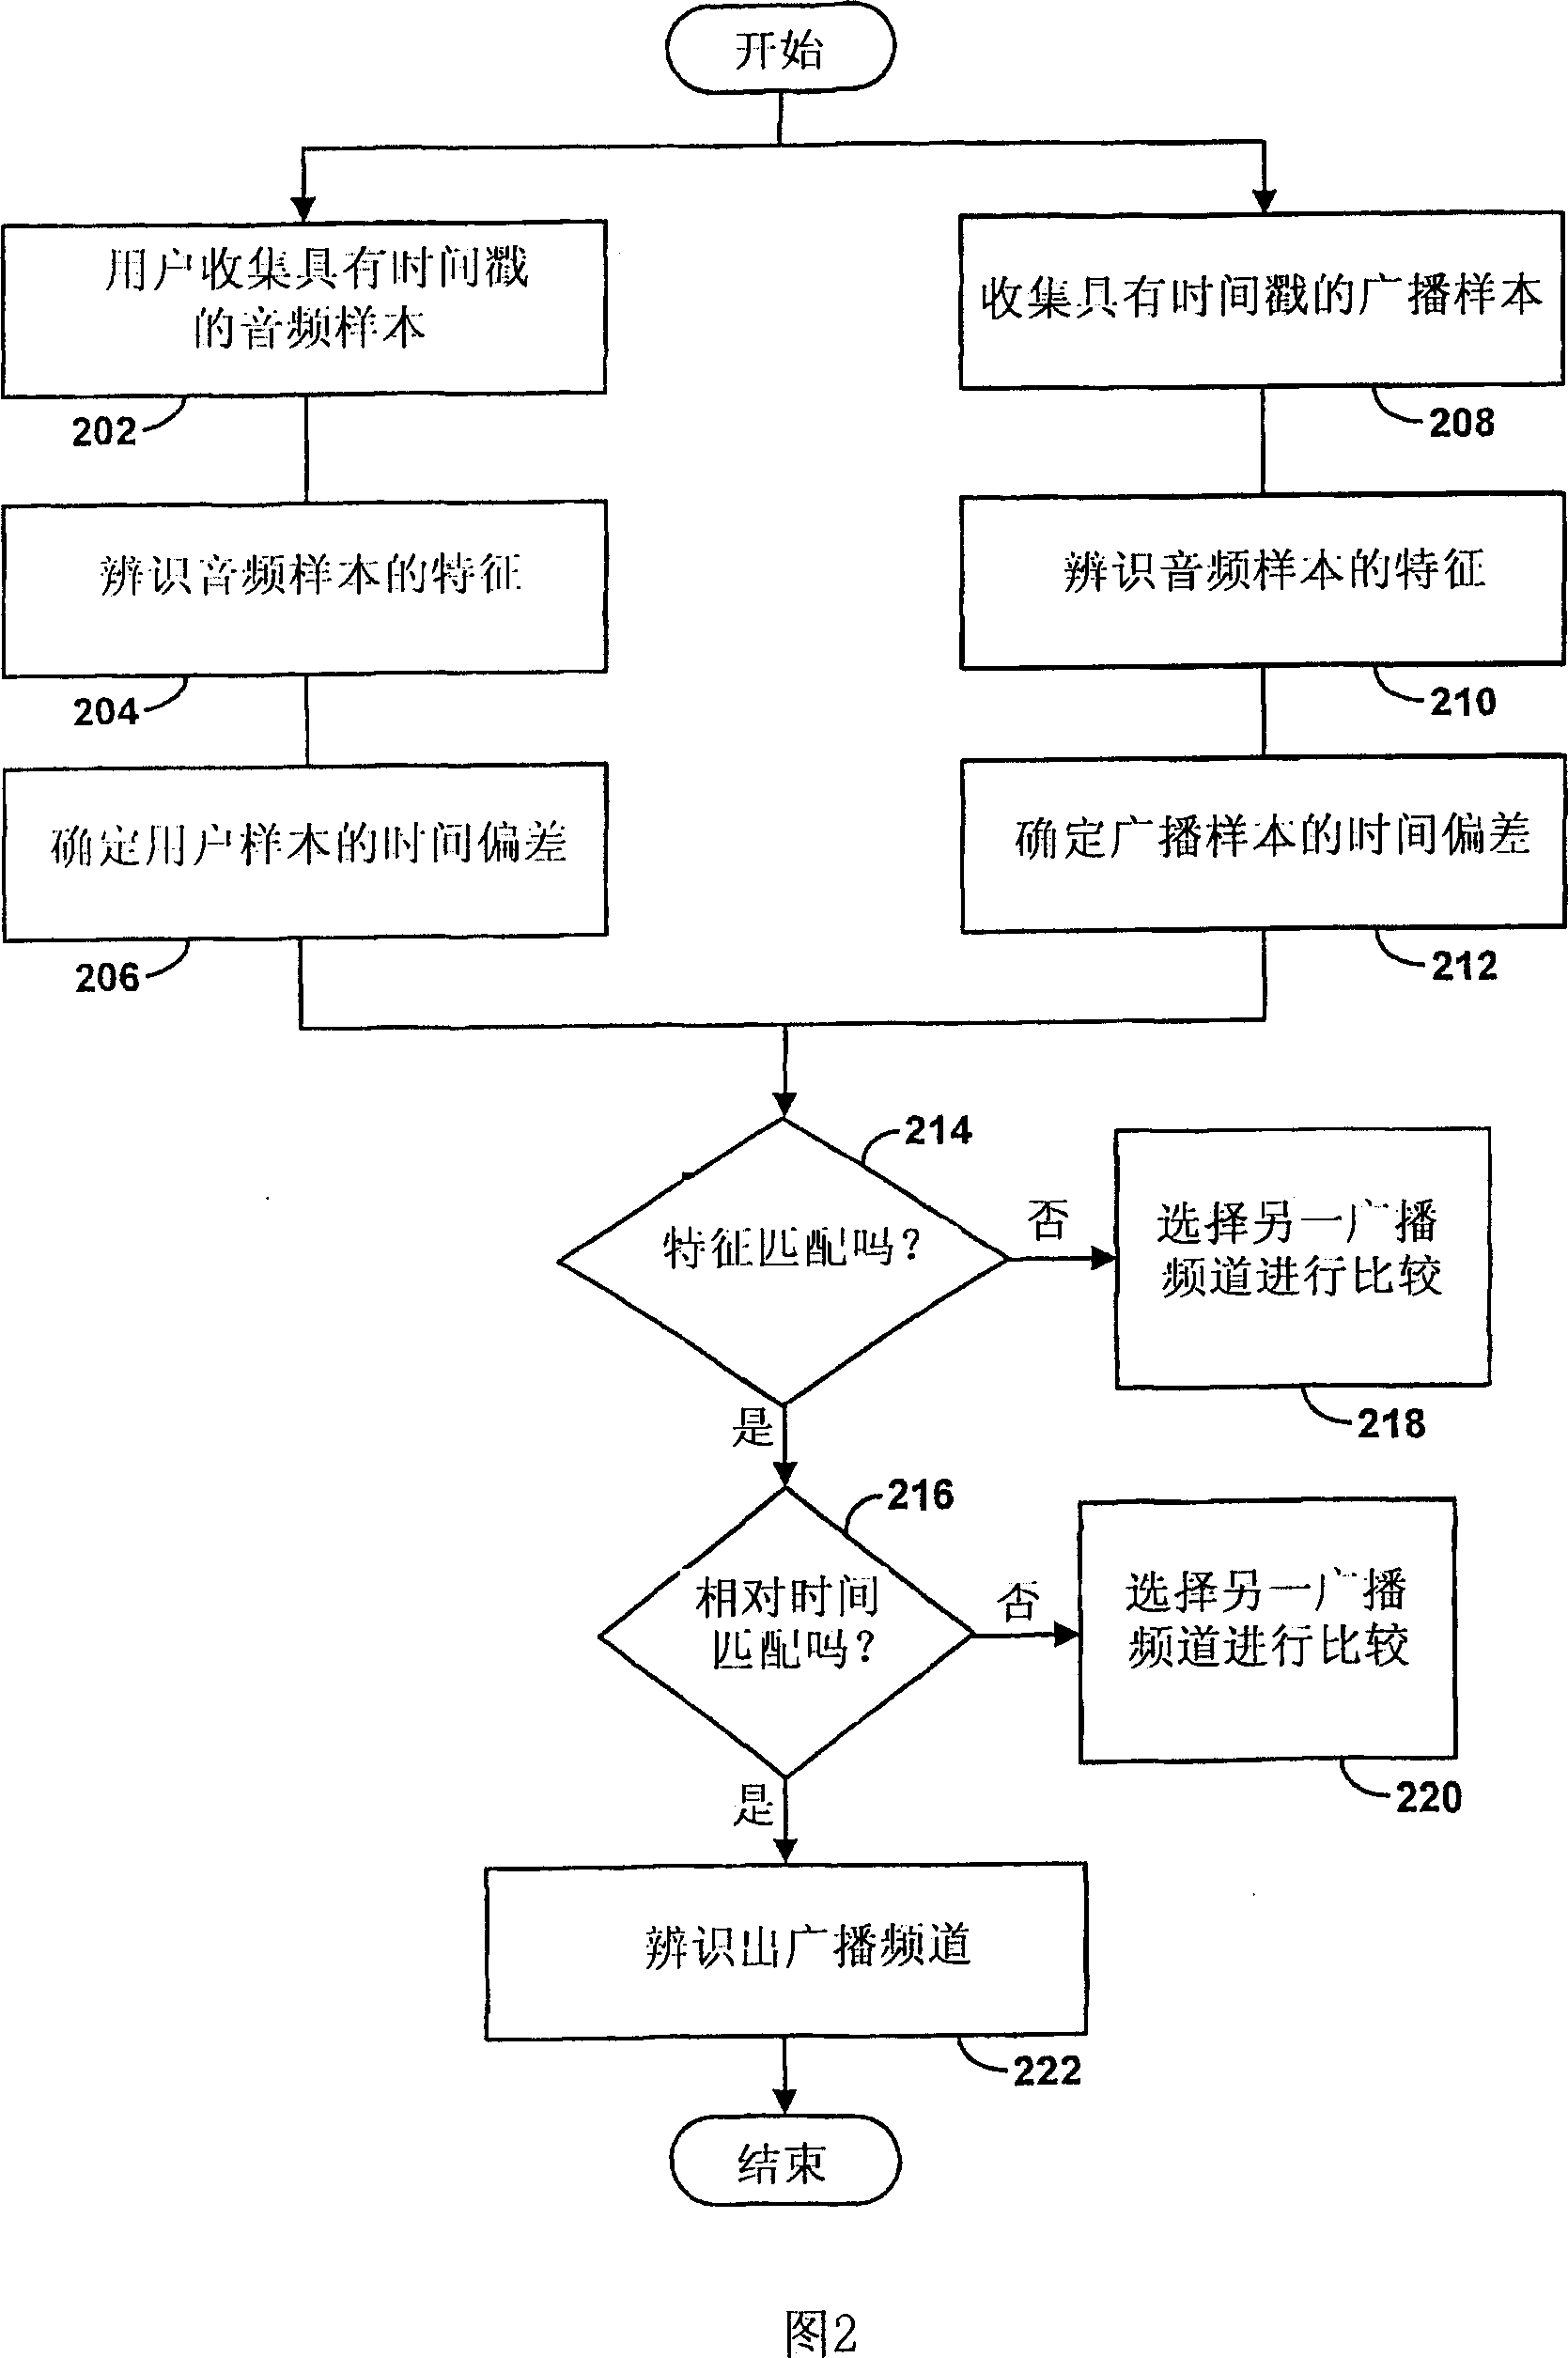 Method and apparatus for identification of broadcast source